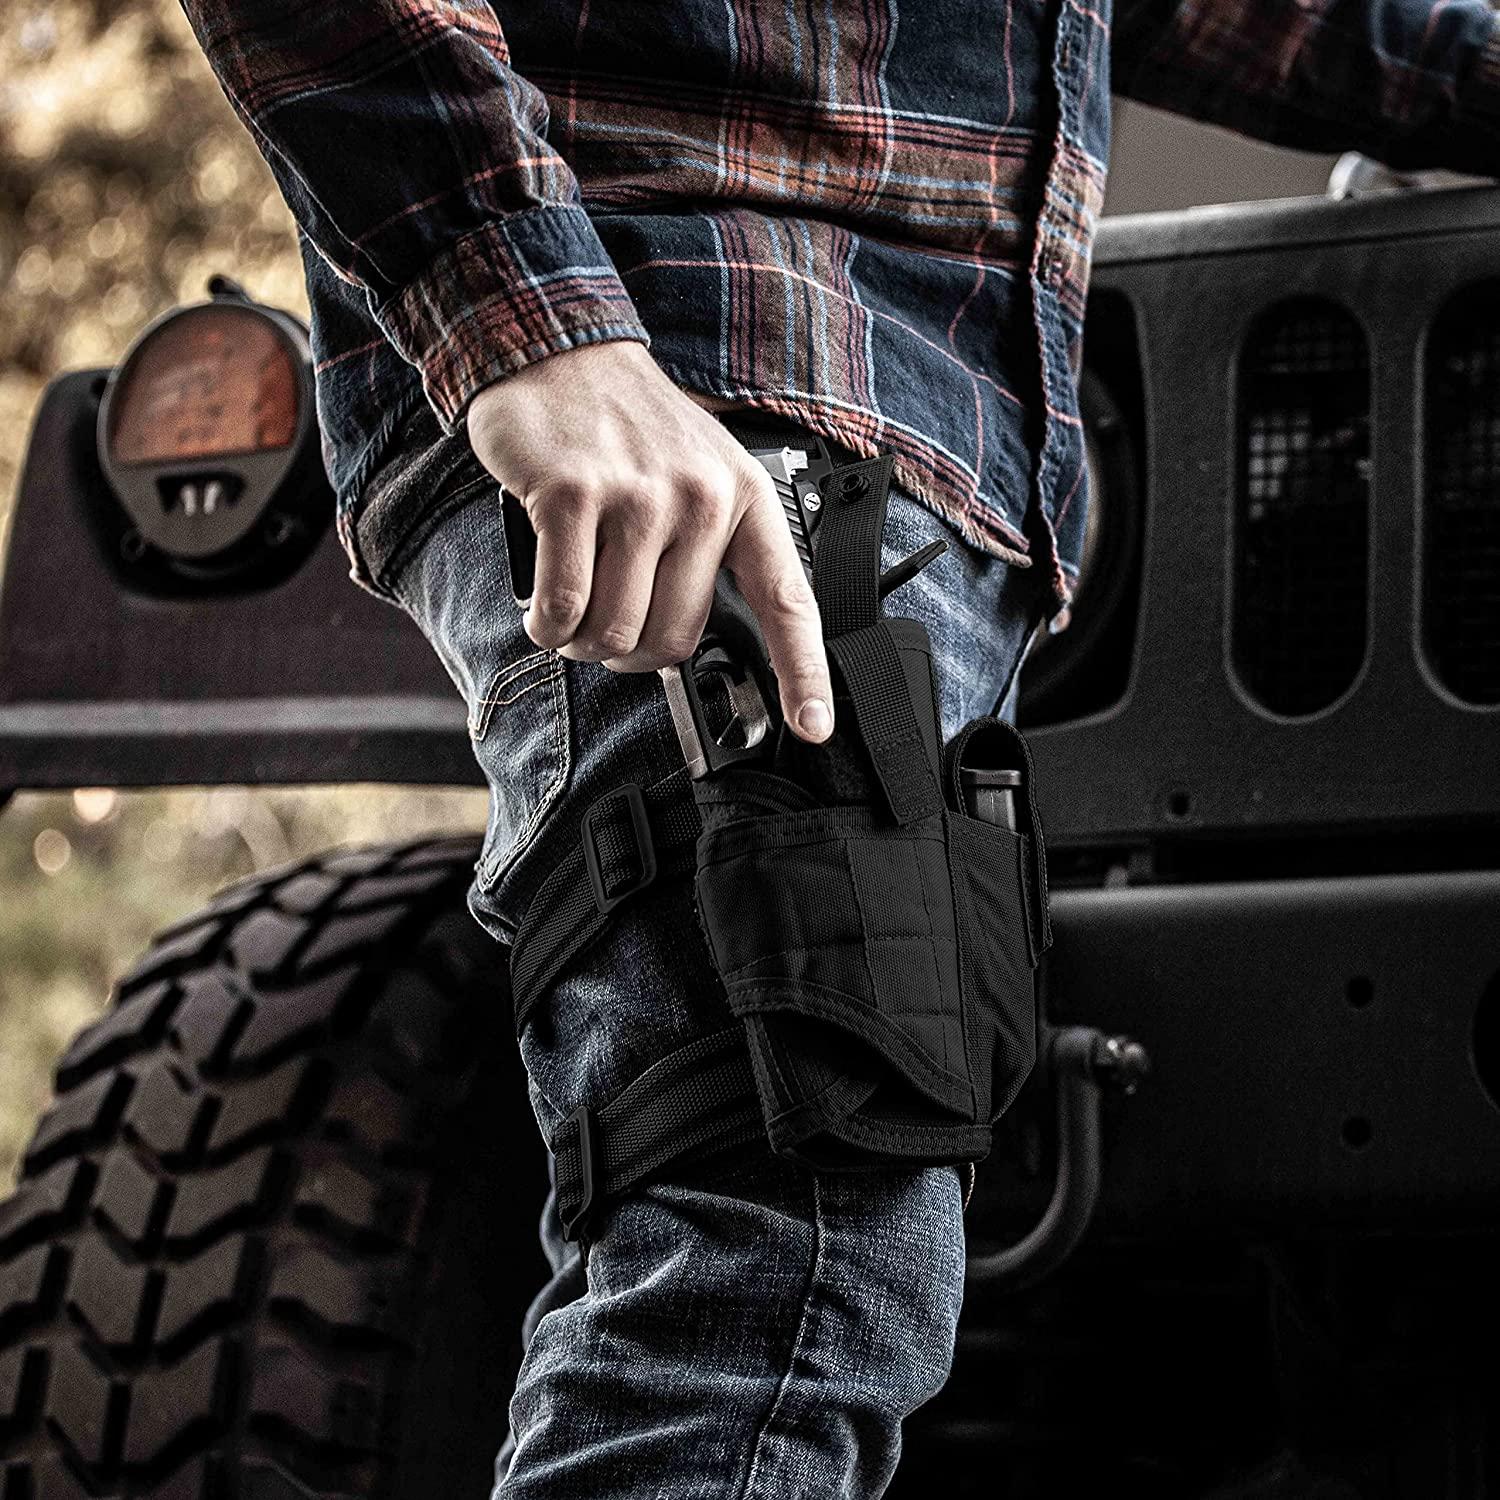 Tacticon Universal Drop Leg Holster, Combat Veteran Owned Company, Tactical Thigh Holster with Mag Pouch